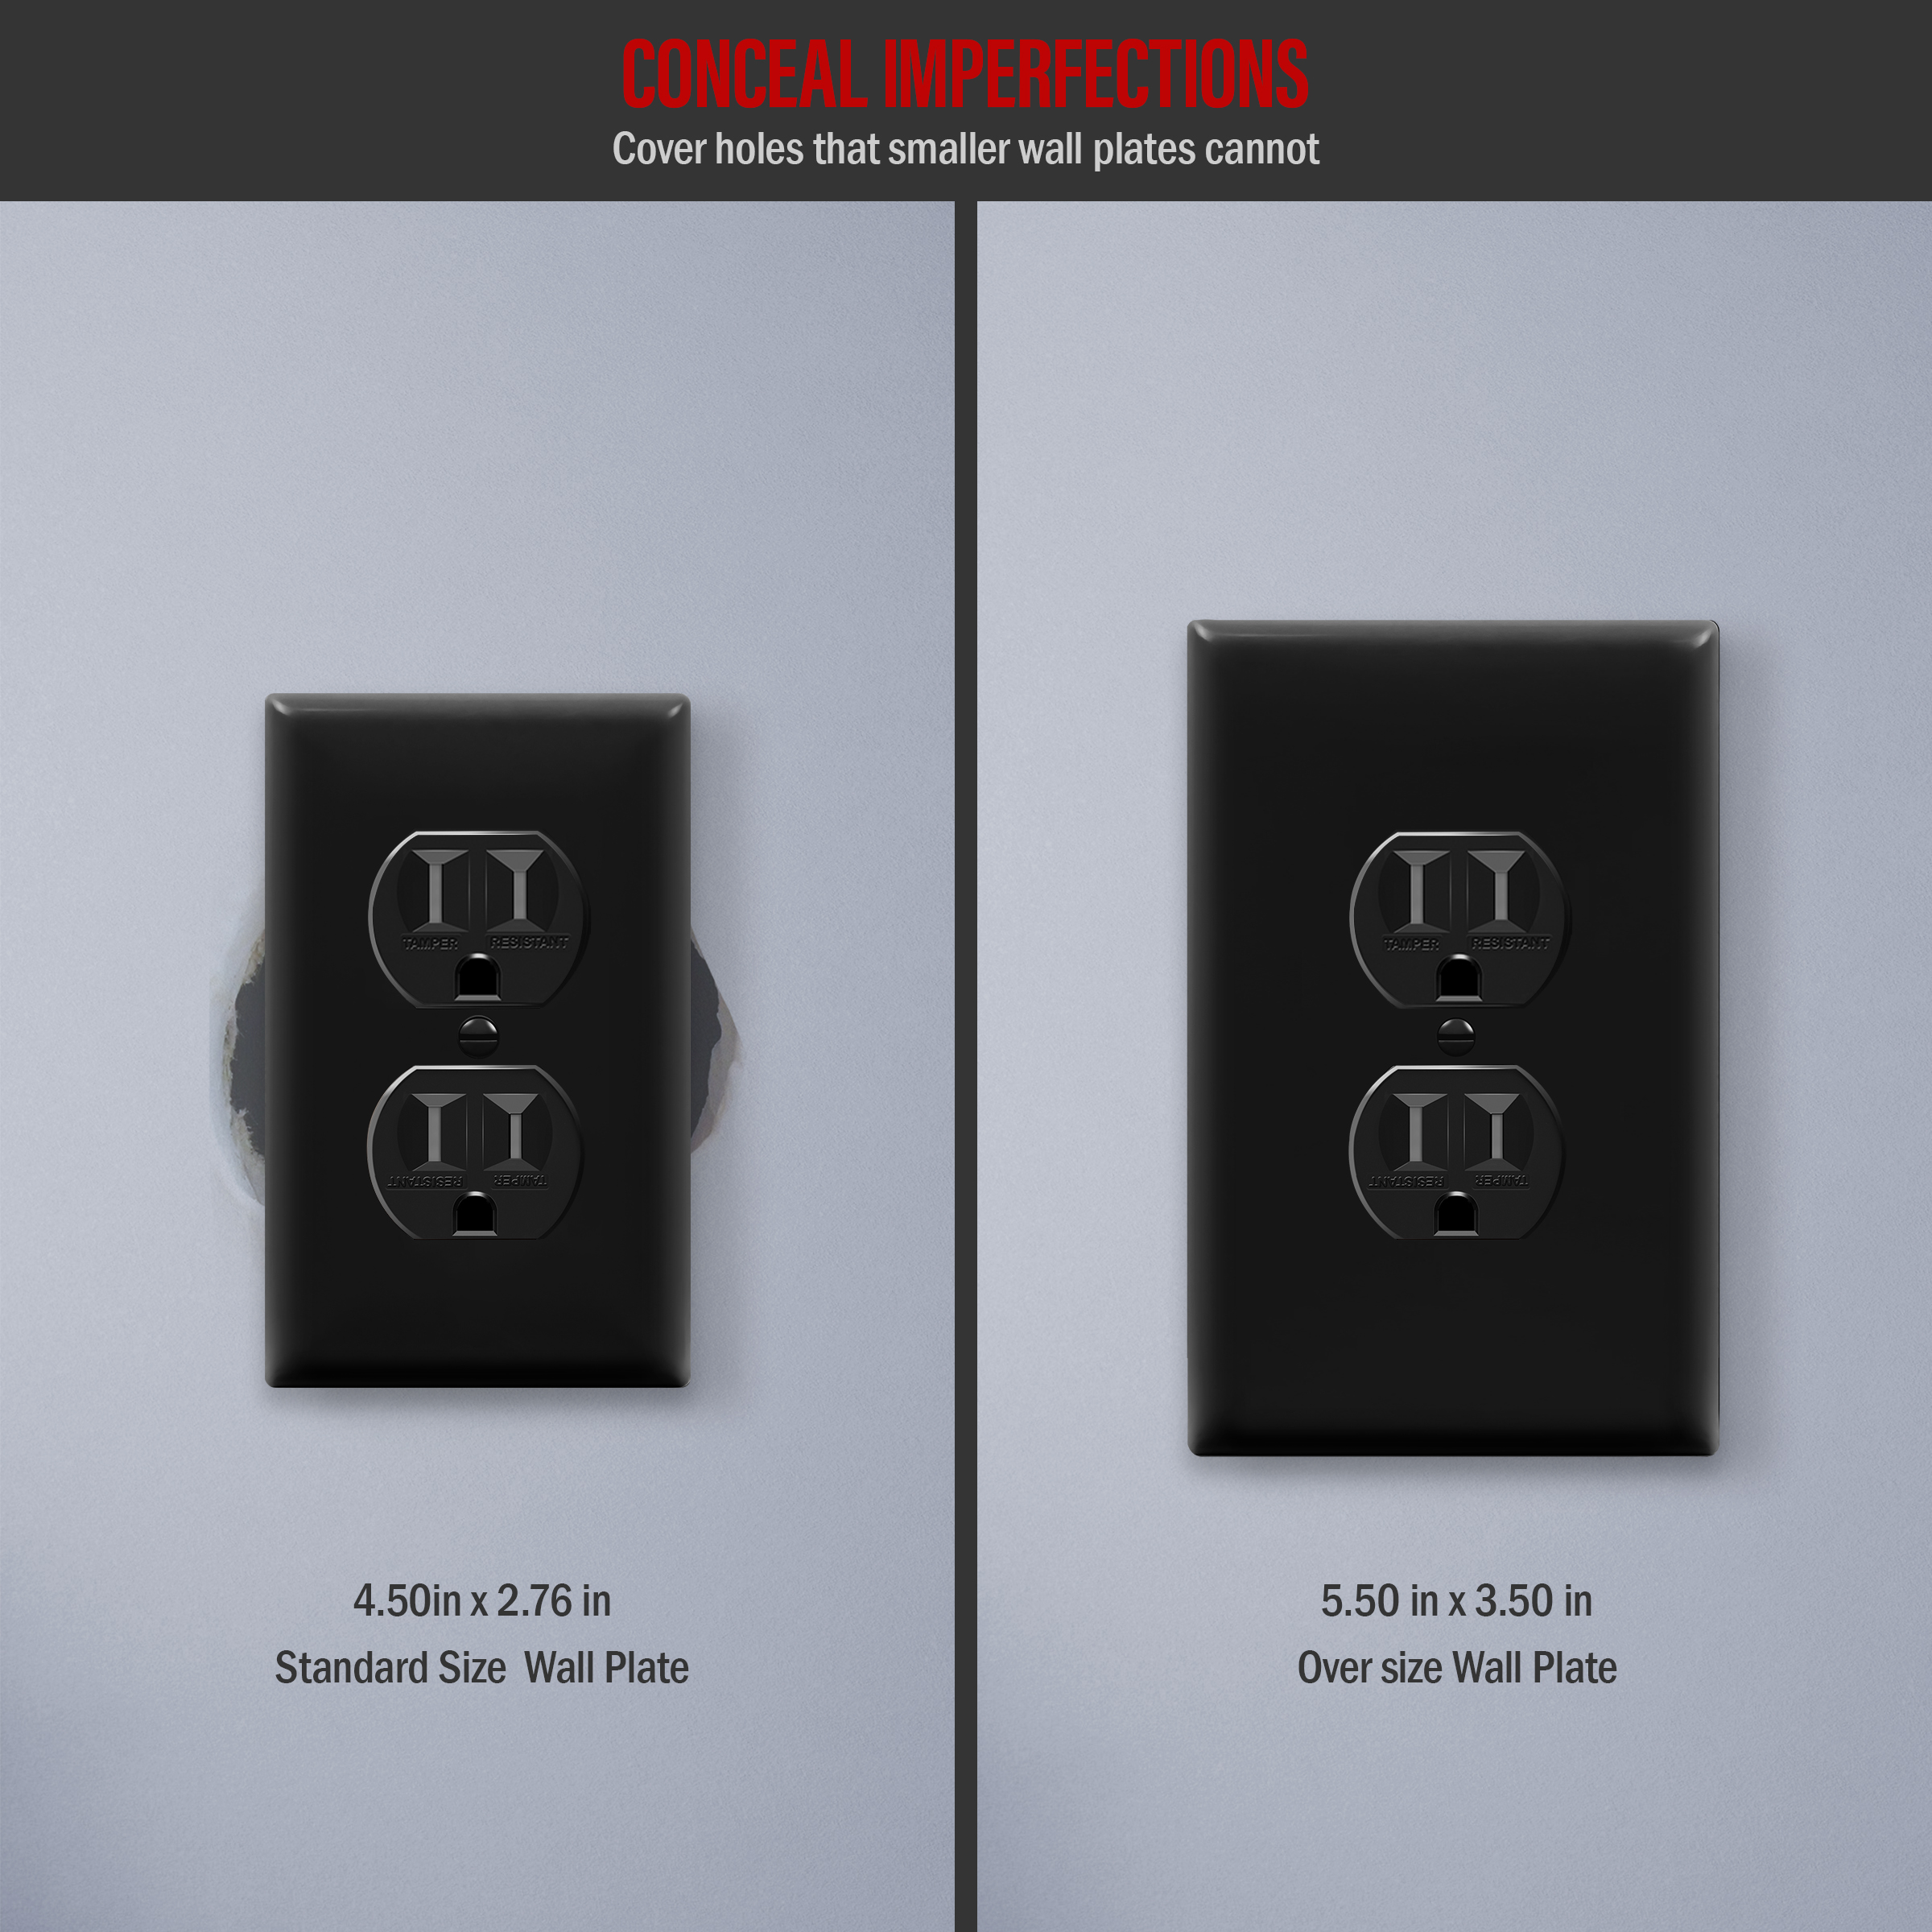 ENERLITES Duplex Receptacle Wall Plate, Jumbo Electrical Outlet Cover, Gloss Finish, Oversized 1-Gang, Polycarbonate Thermoplastic, Black - image 5 of 5